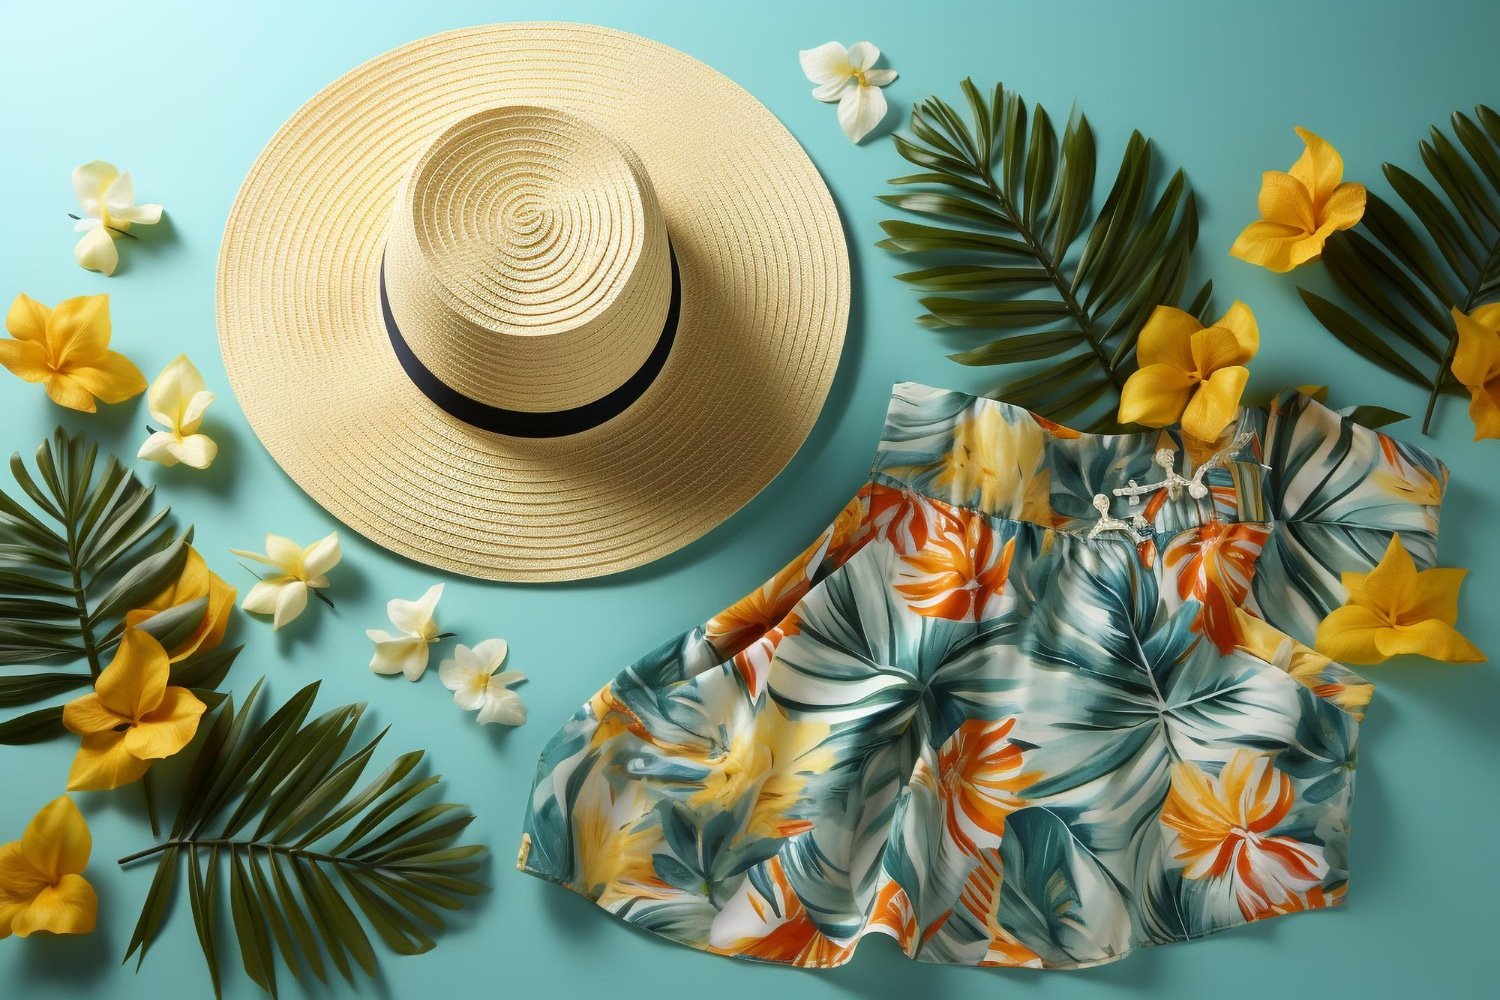 Relax In Paradise With Tiare Hawaii’s Beach-Inspired Clothing And Accessories